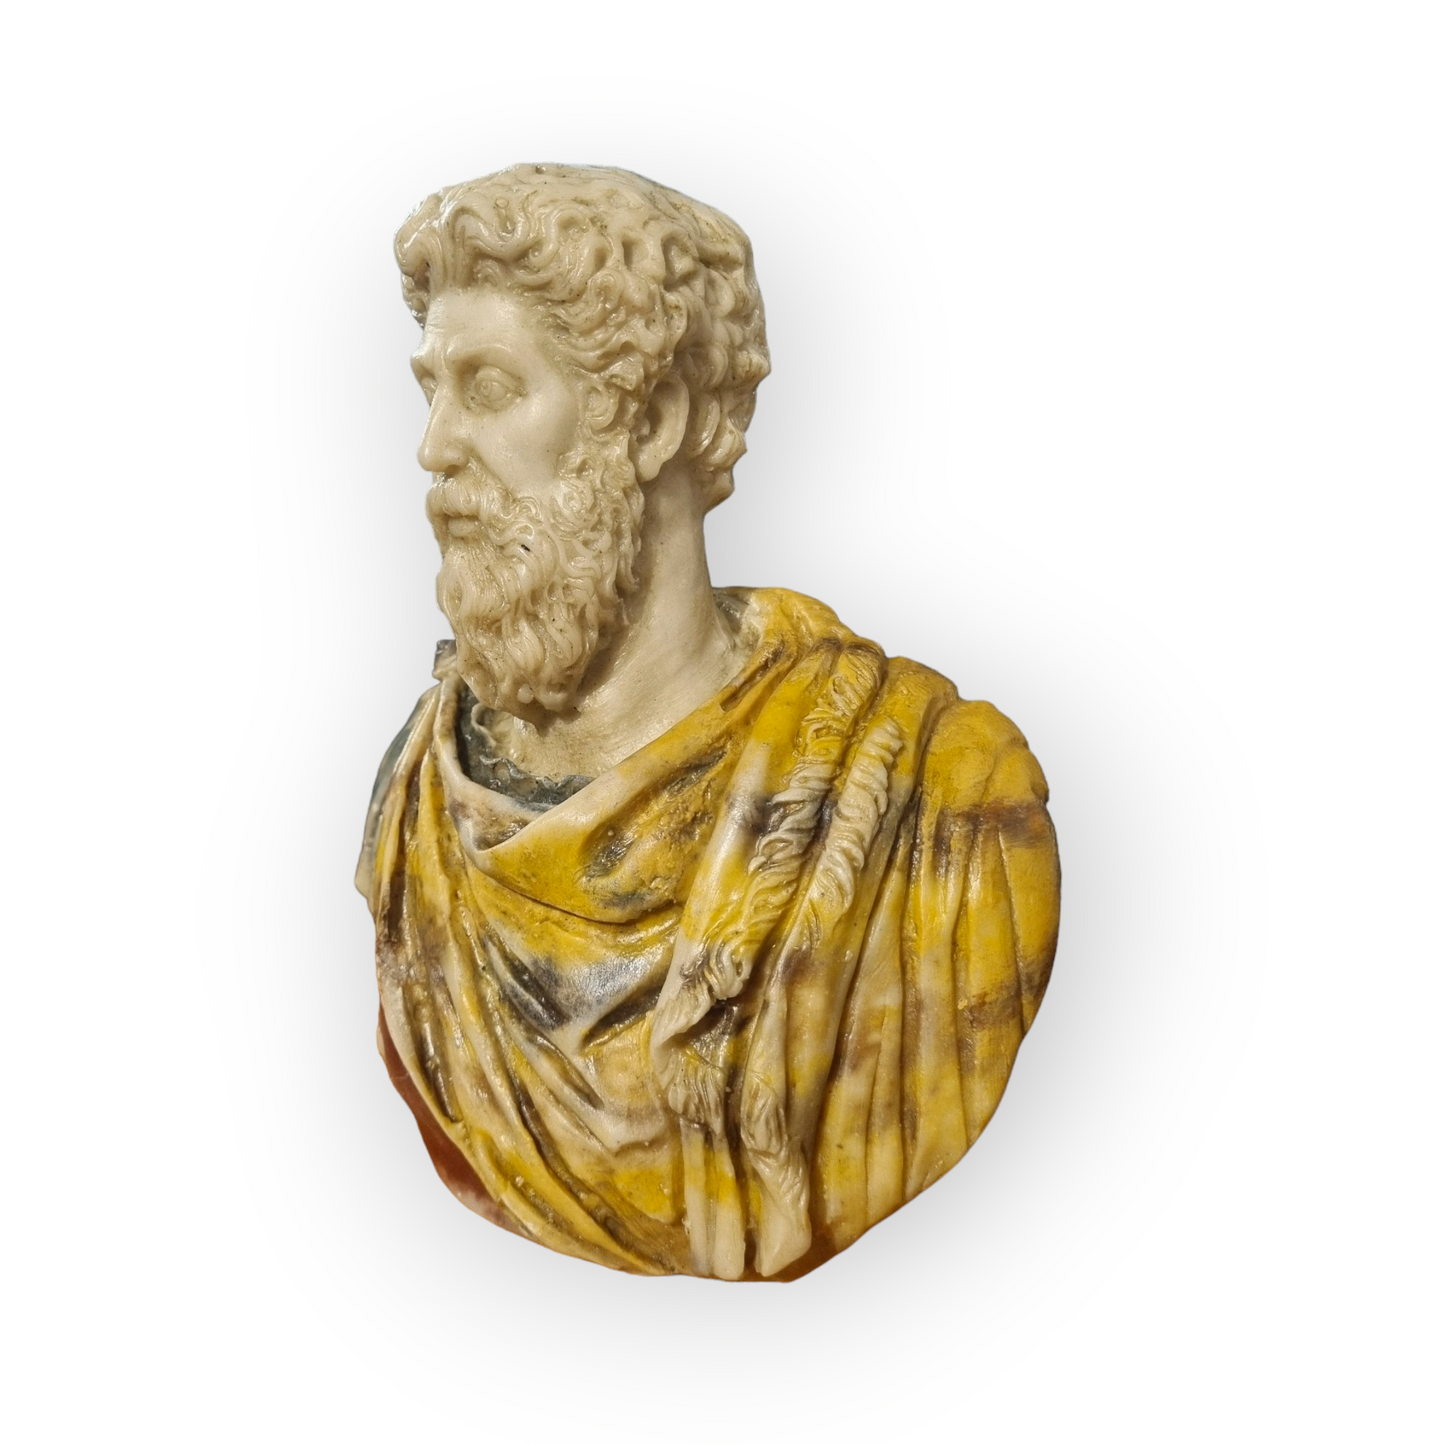 Grand Tour Interest - A Diminutive Roman Antique Reconstituted Stone / Marble Bust of Marcus Aurelius in the Classical Manner